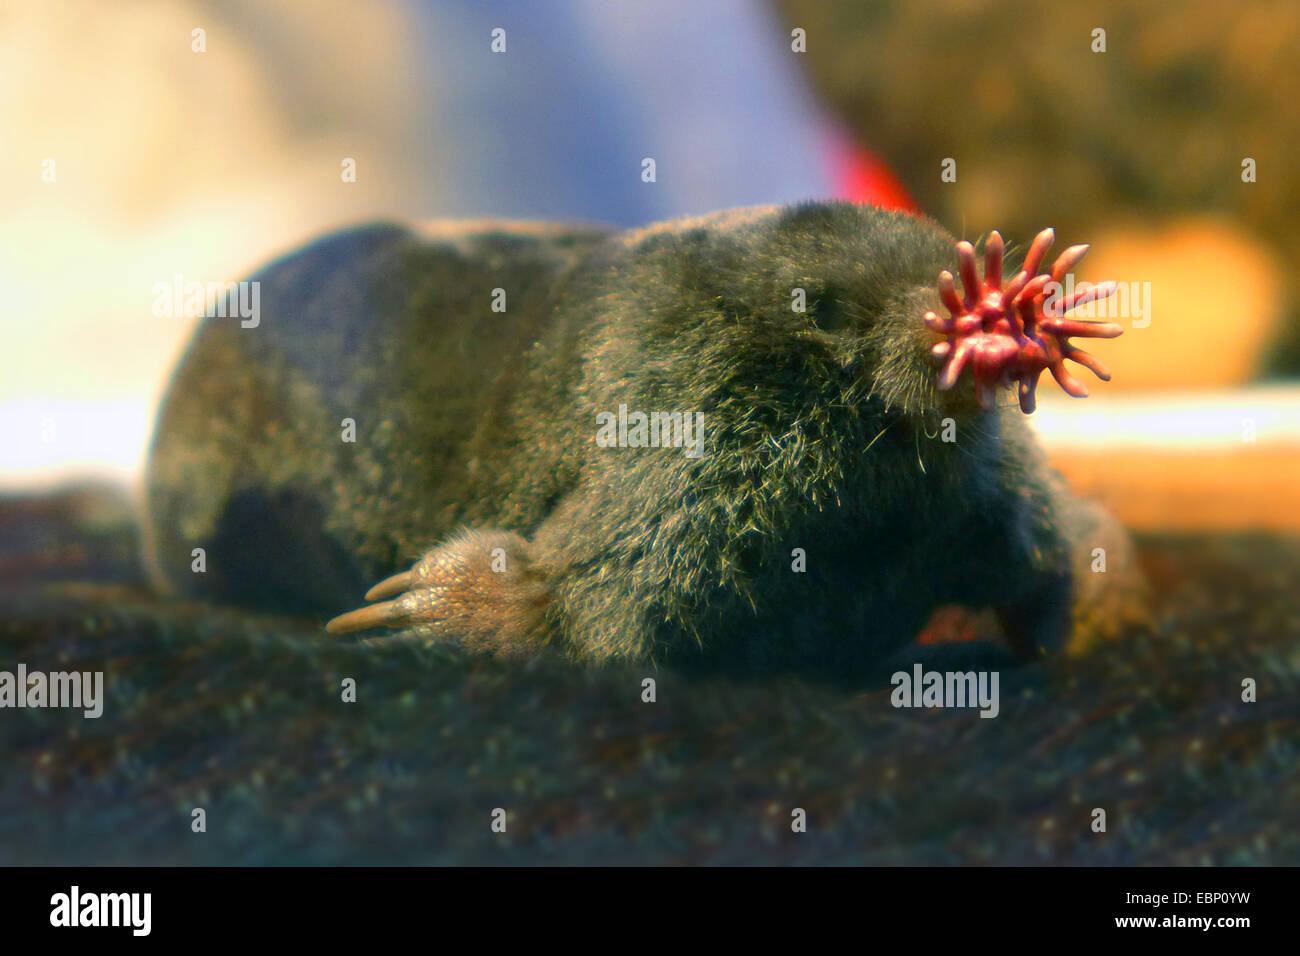 Star-nosed mole (Condylura cristata), snout with pink fleshy appendages used as a touch organ Stock Photo